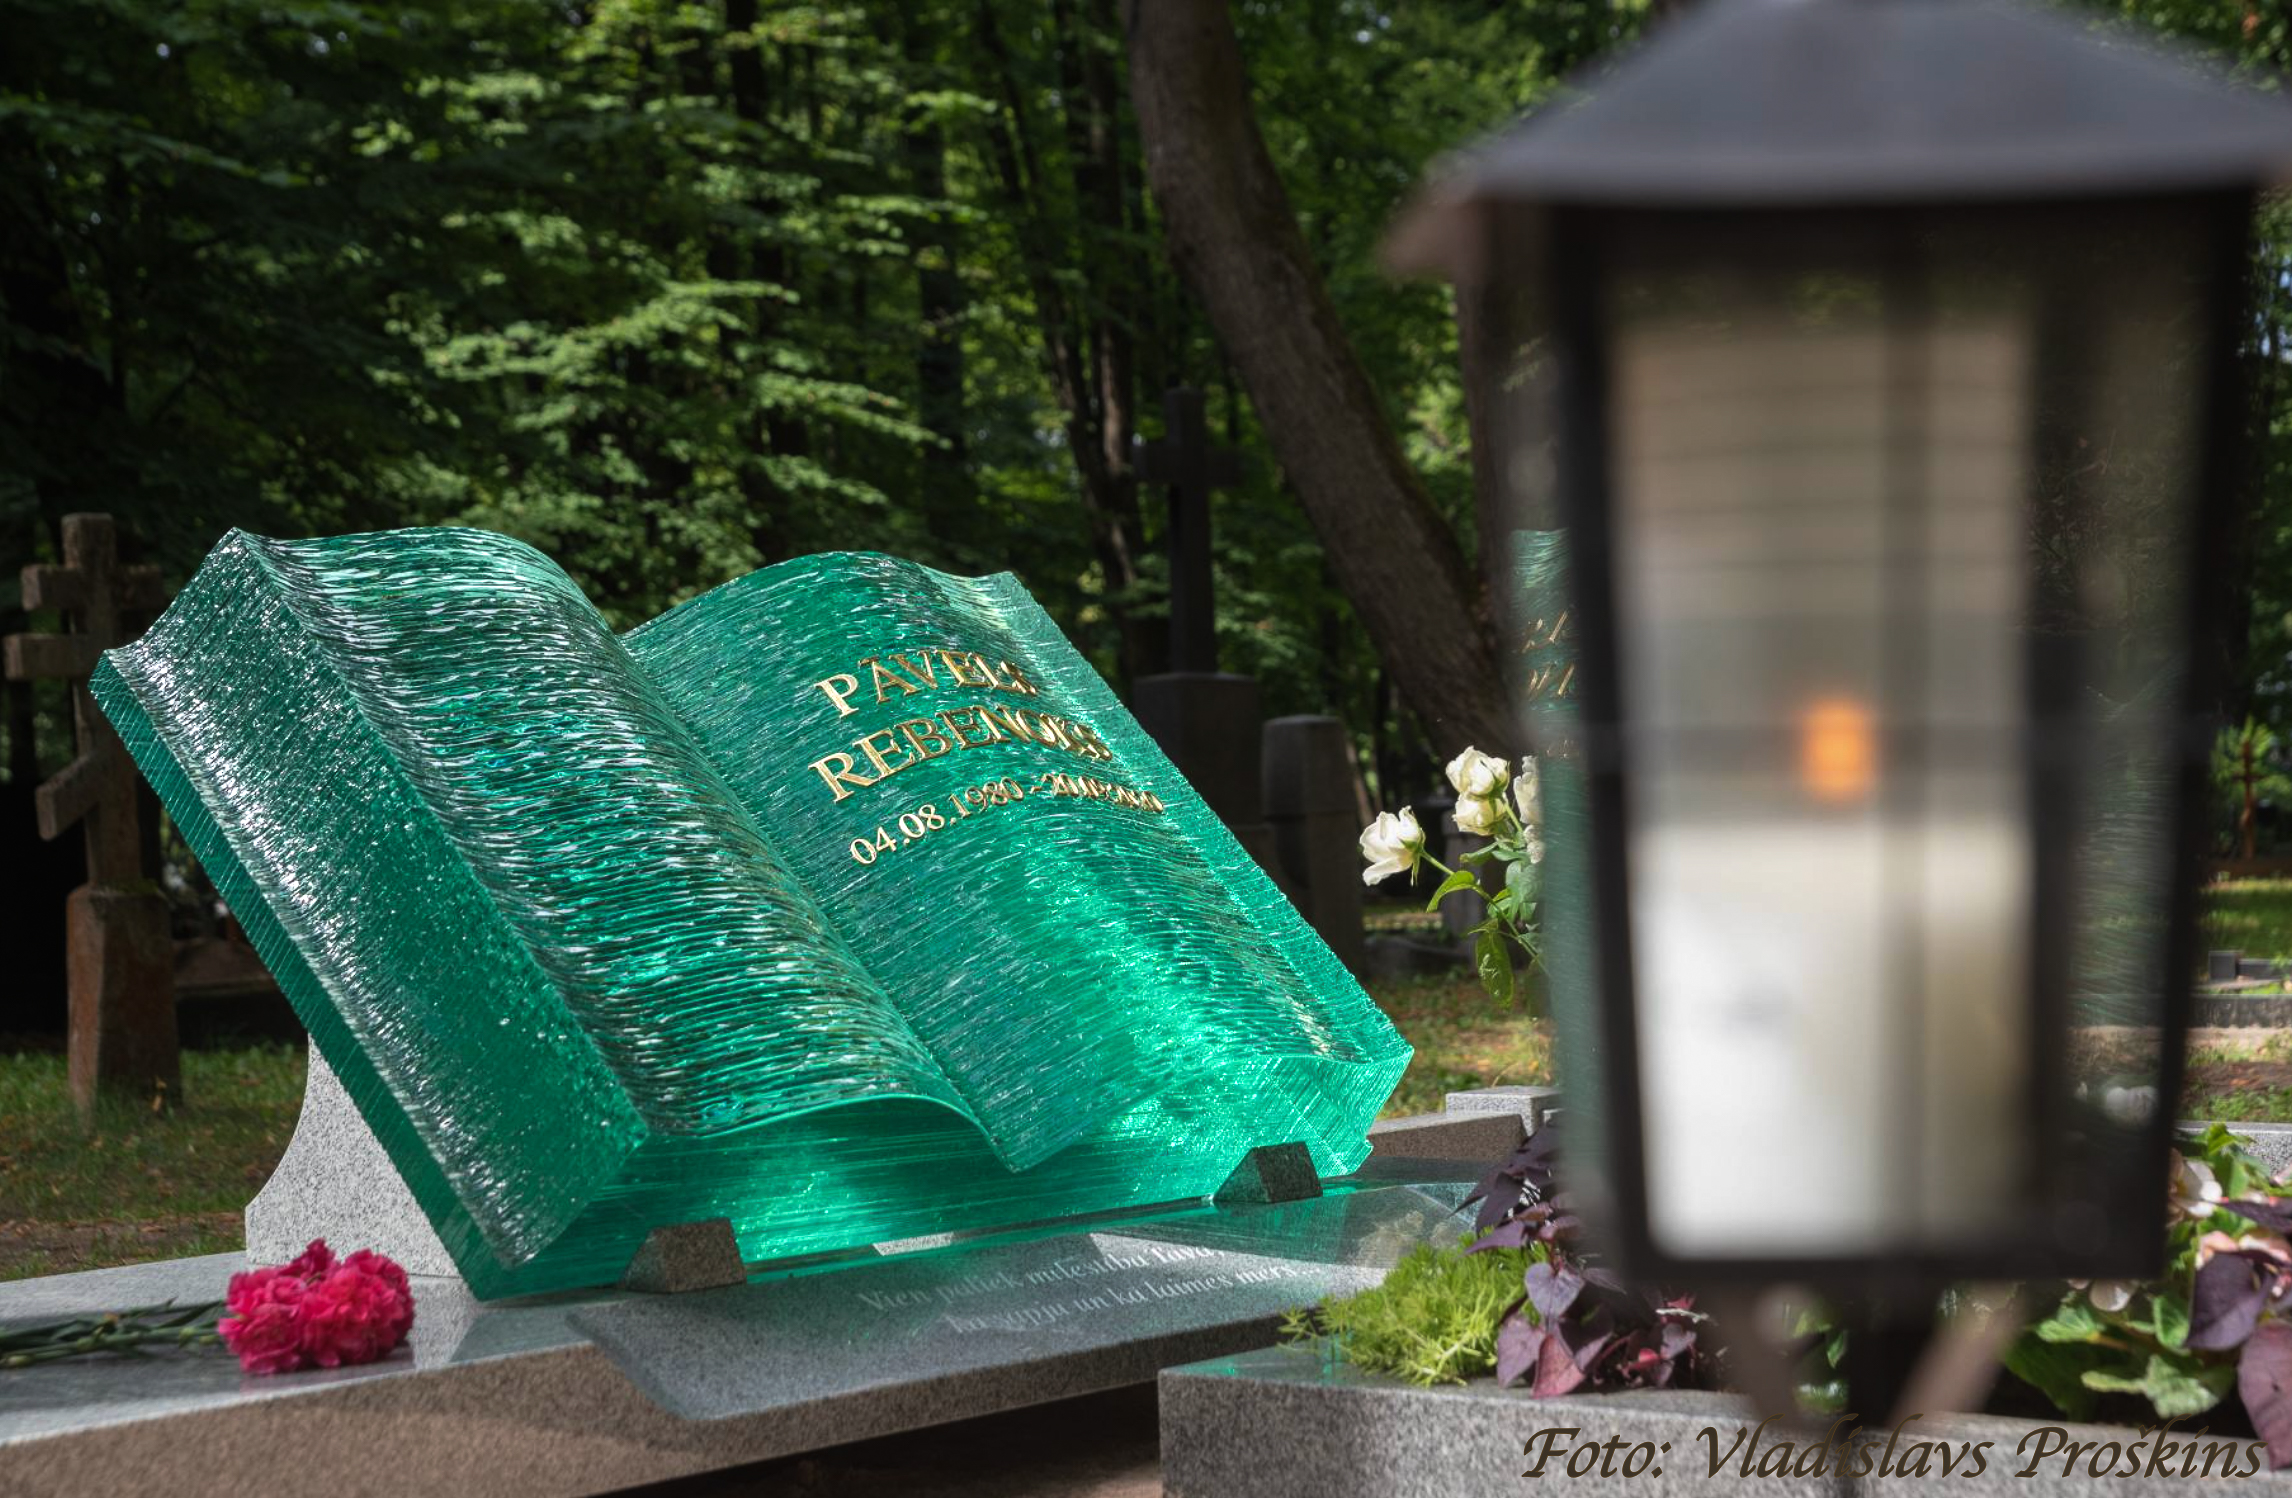 Special headstone in the form of a book made of glass,headstone book,headstone in the shape of a book,grave monument in the shape of a book,Glass headstone,glass grave monument